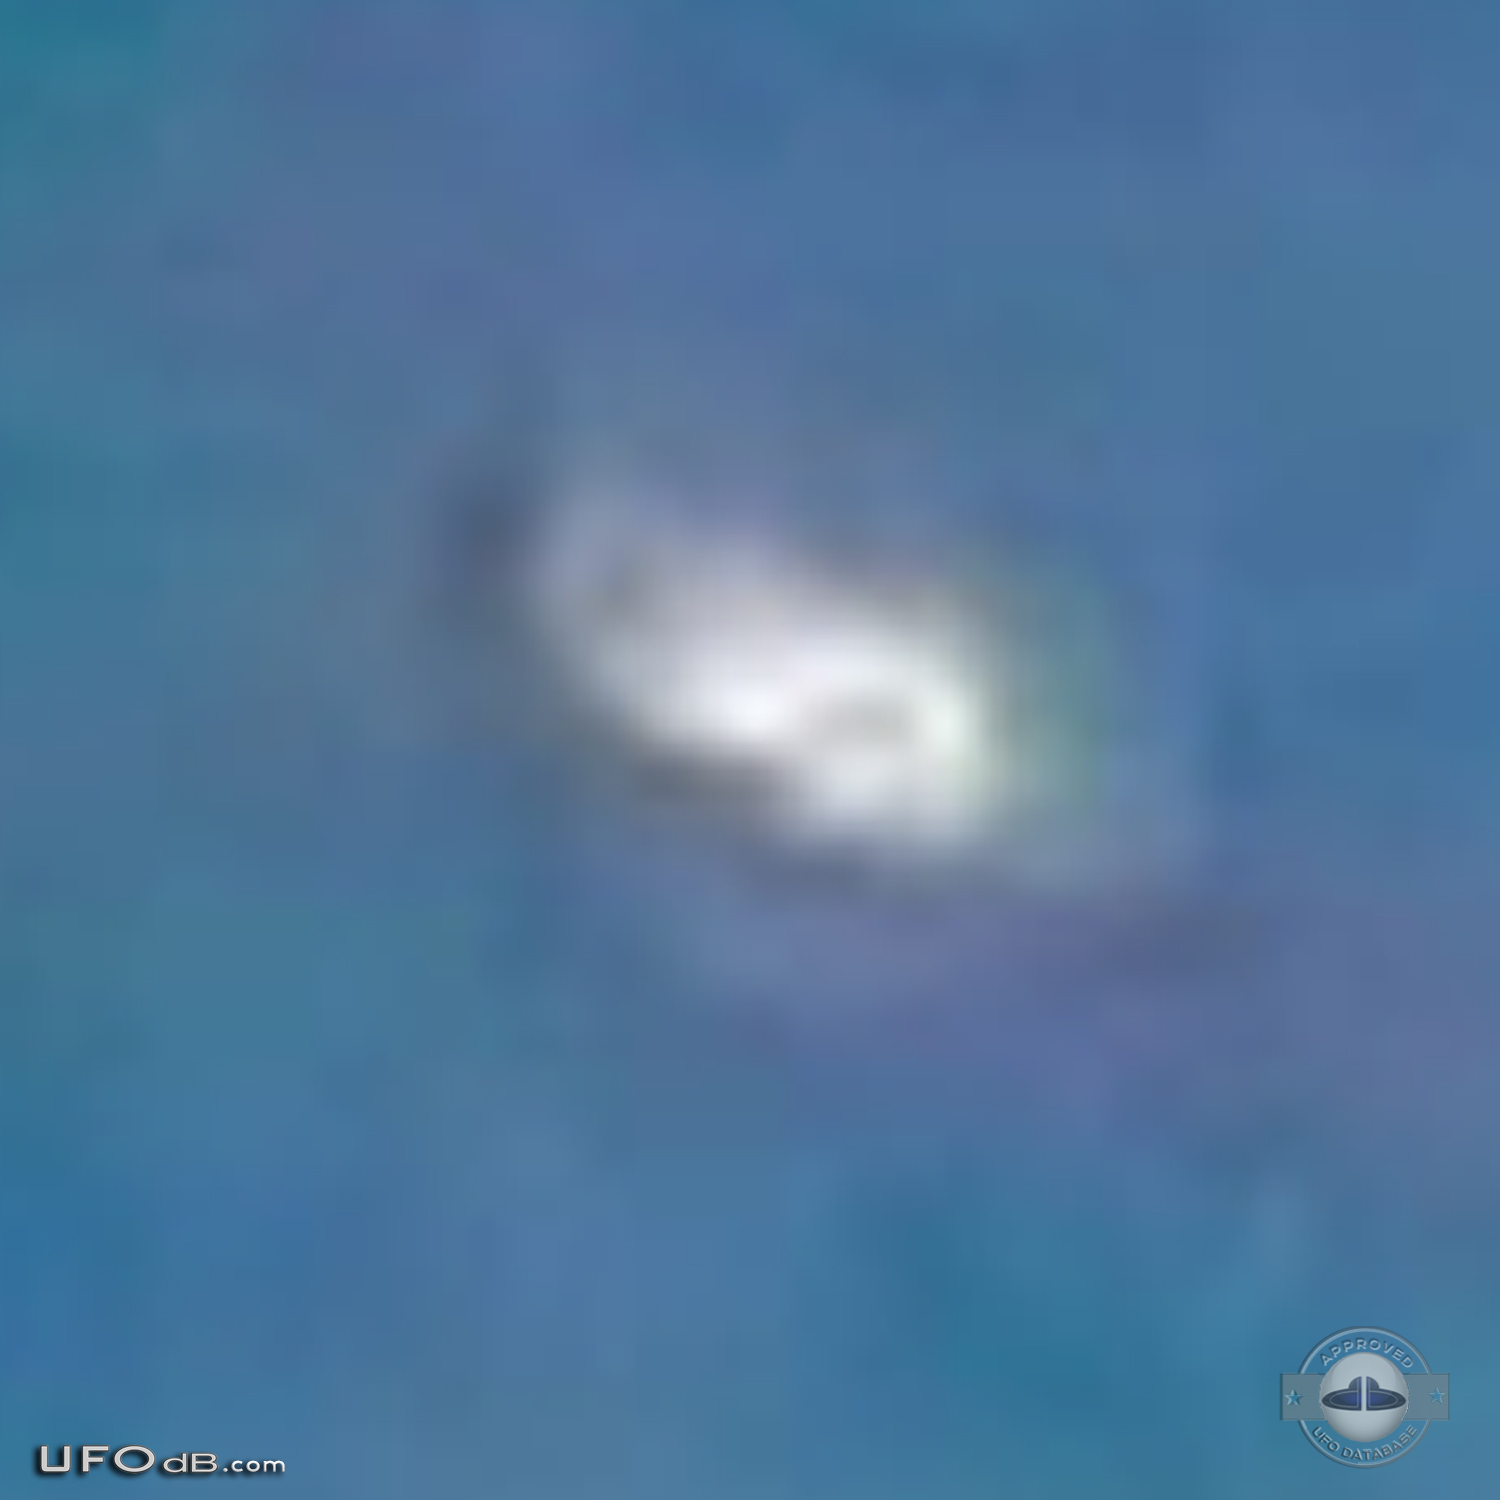 Unmoving Star turns out to be a UFO in Cooma, NSW, Australia 2012 UFO Picture #477-4